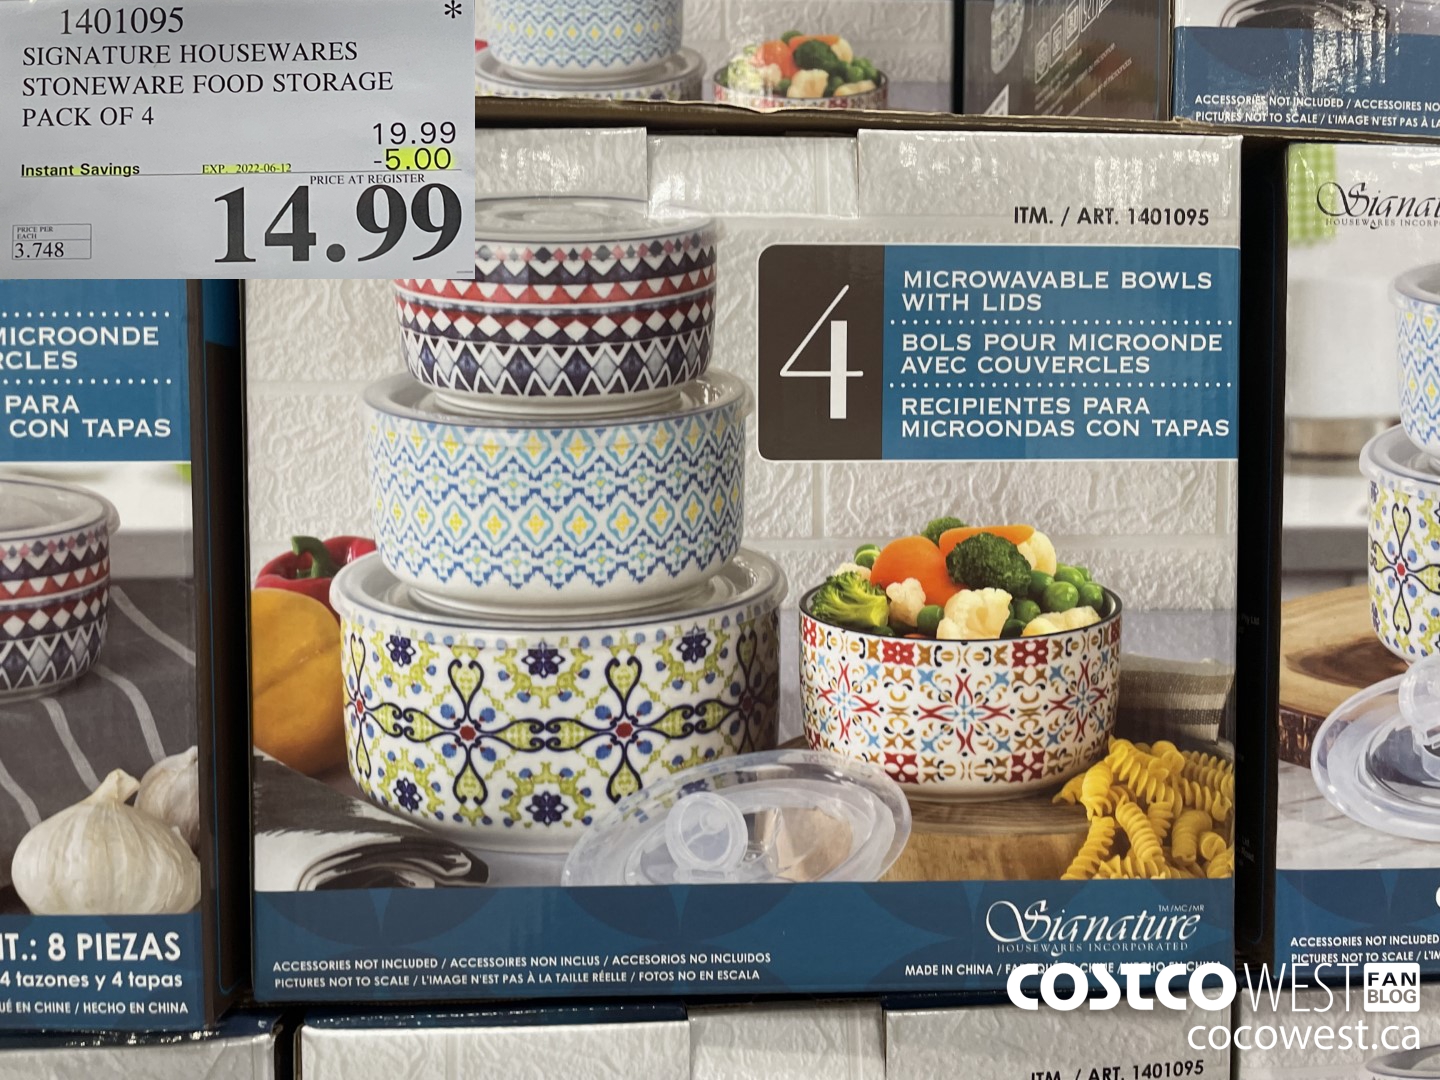 Costco Flyer & Costco Sale Items for June 6-12, 2022, for BC, AB, SK, MB -  Costco West Fan Blog